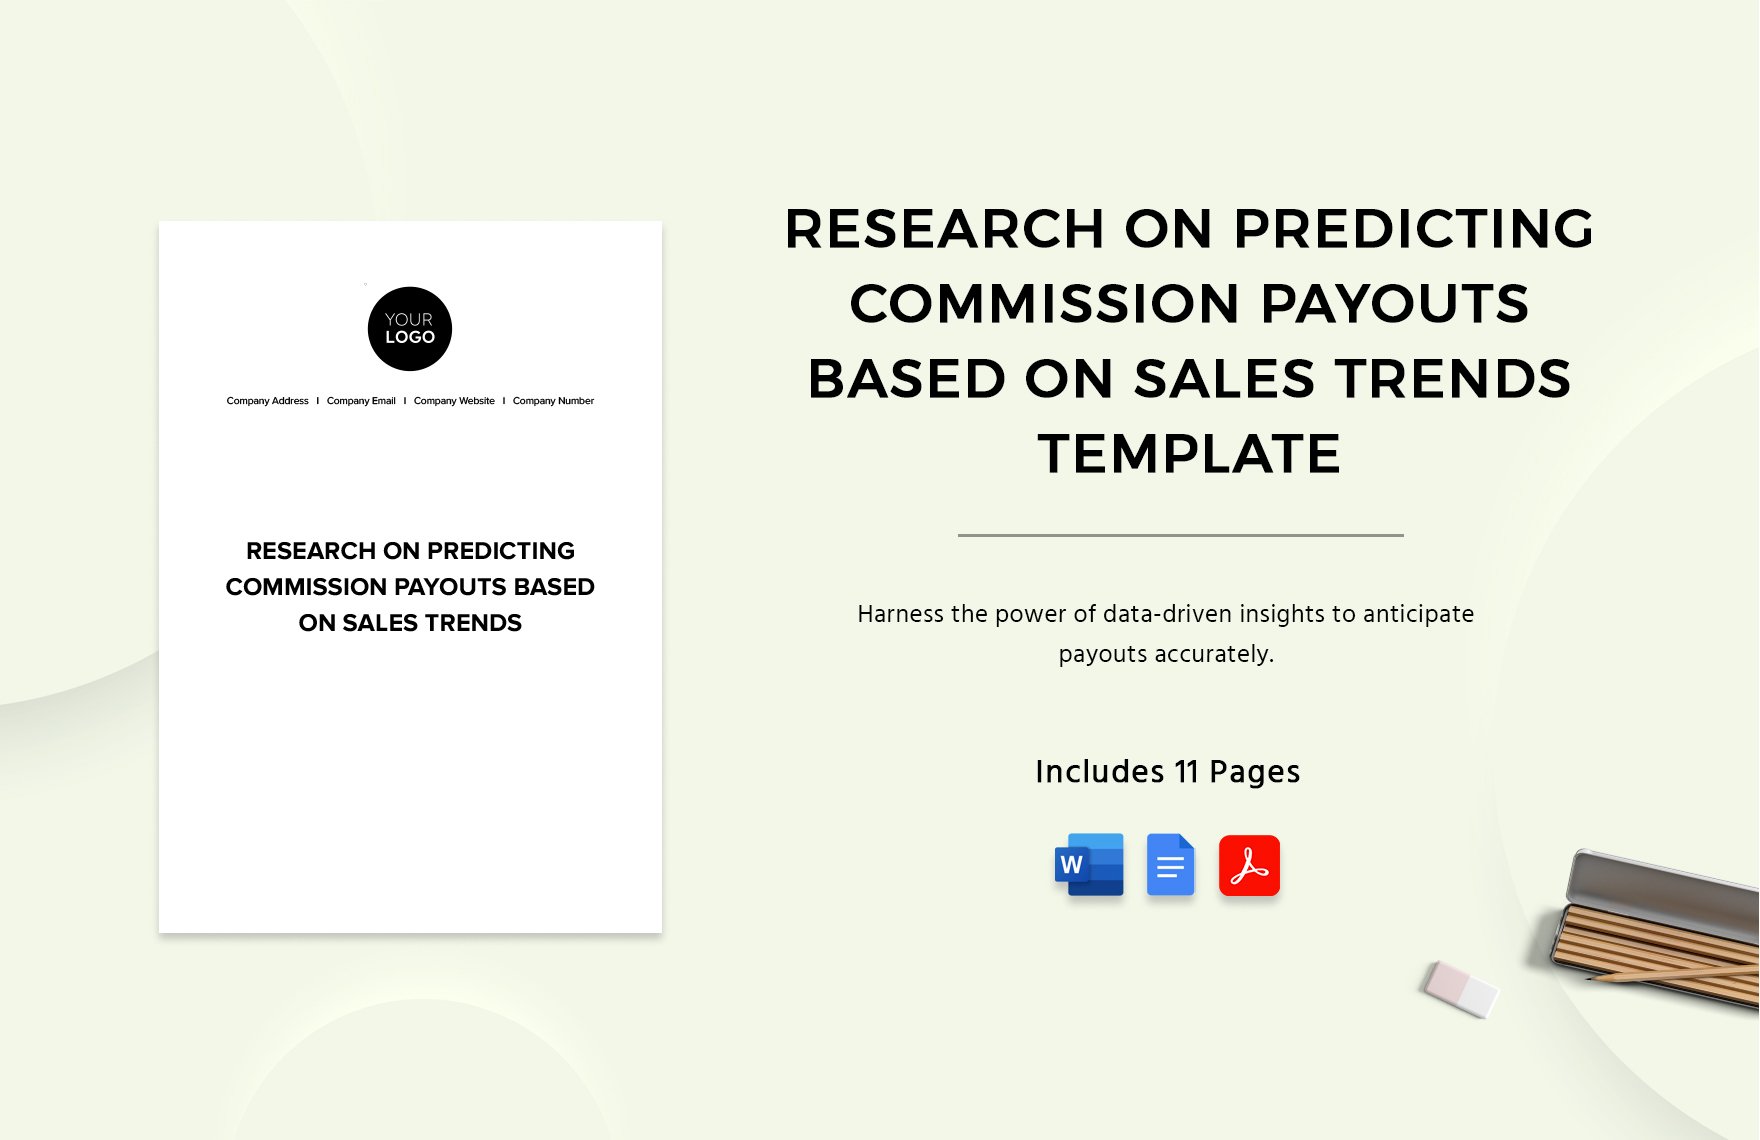 Research on Predicting Commission Payouts Based on Sales Trends Template